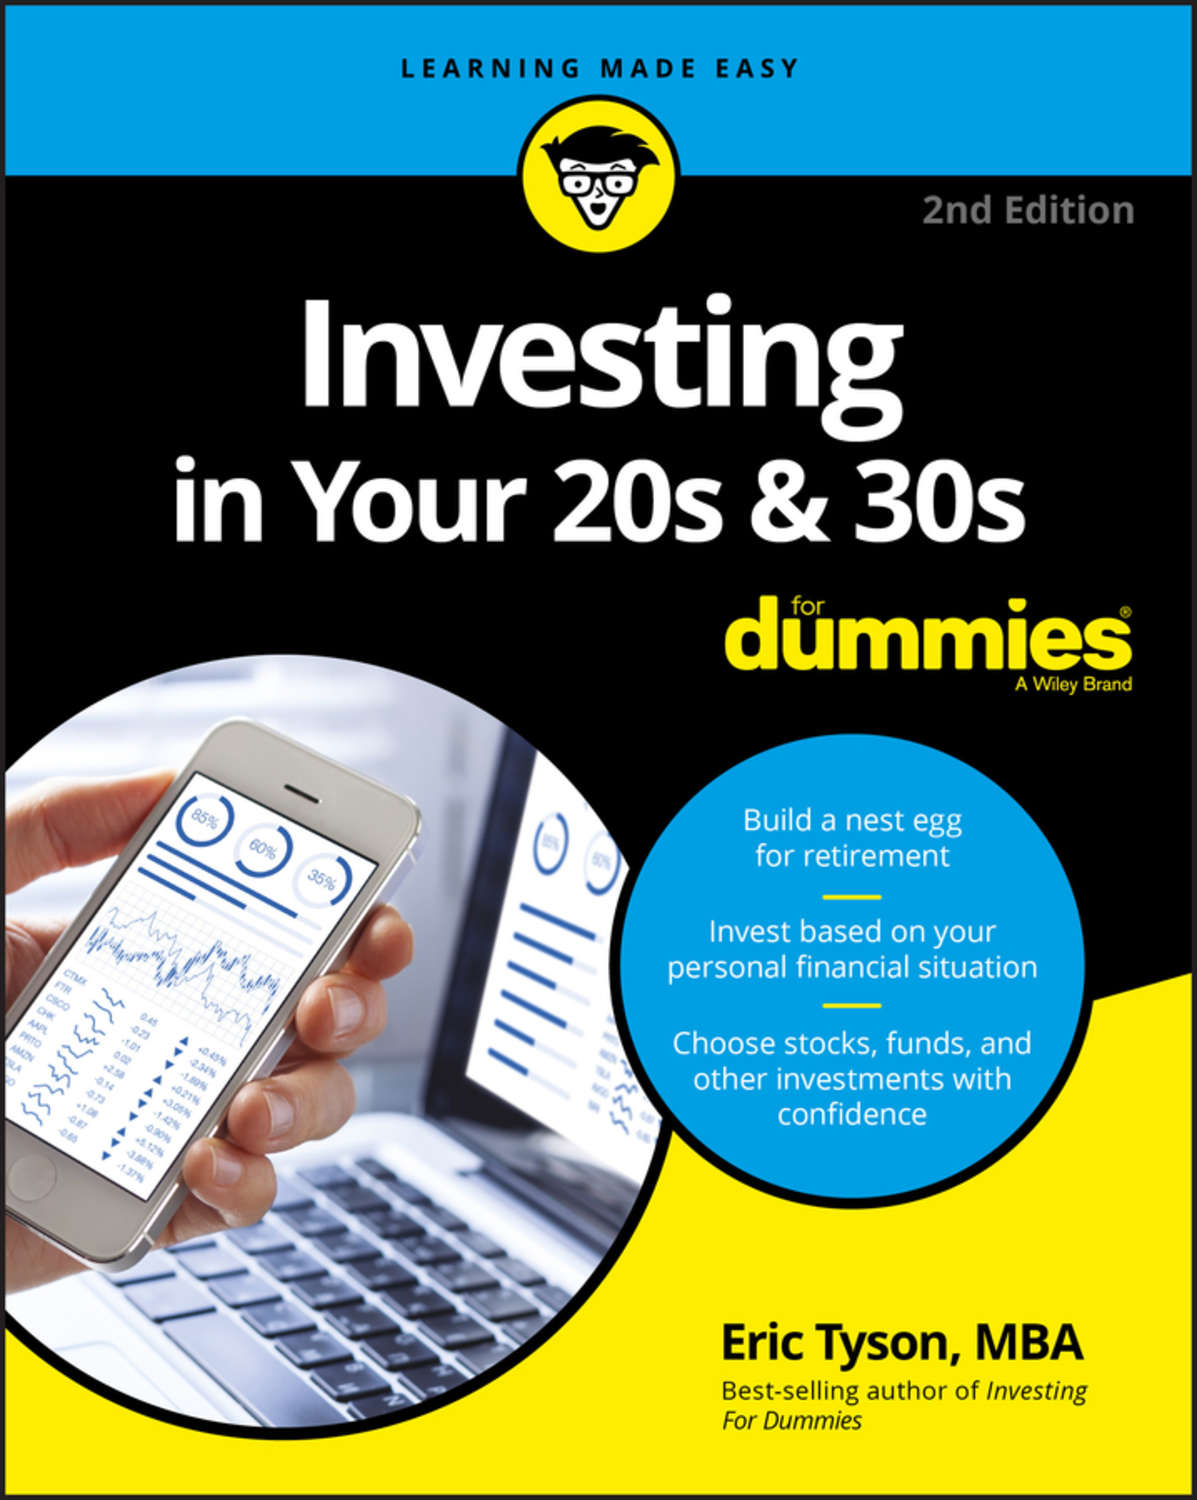 investing in your 20s